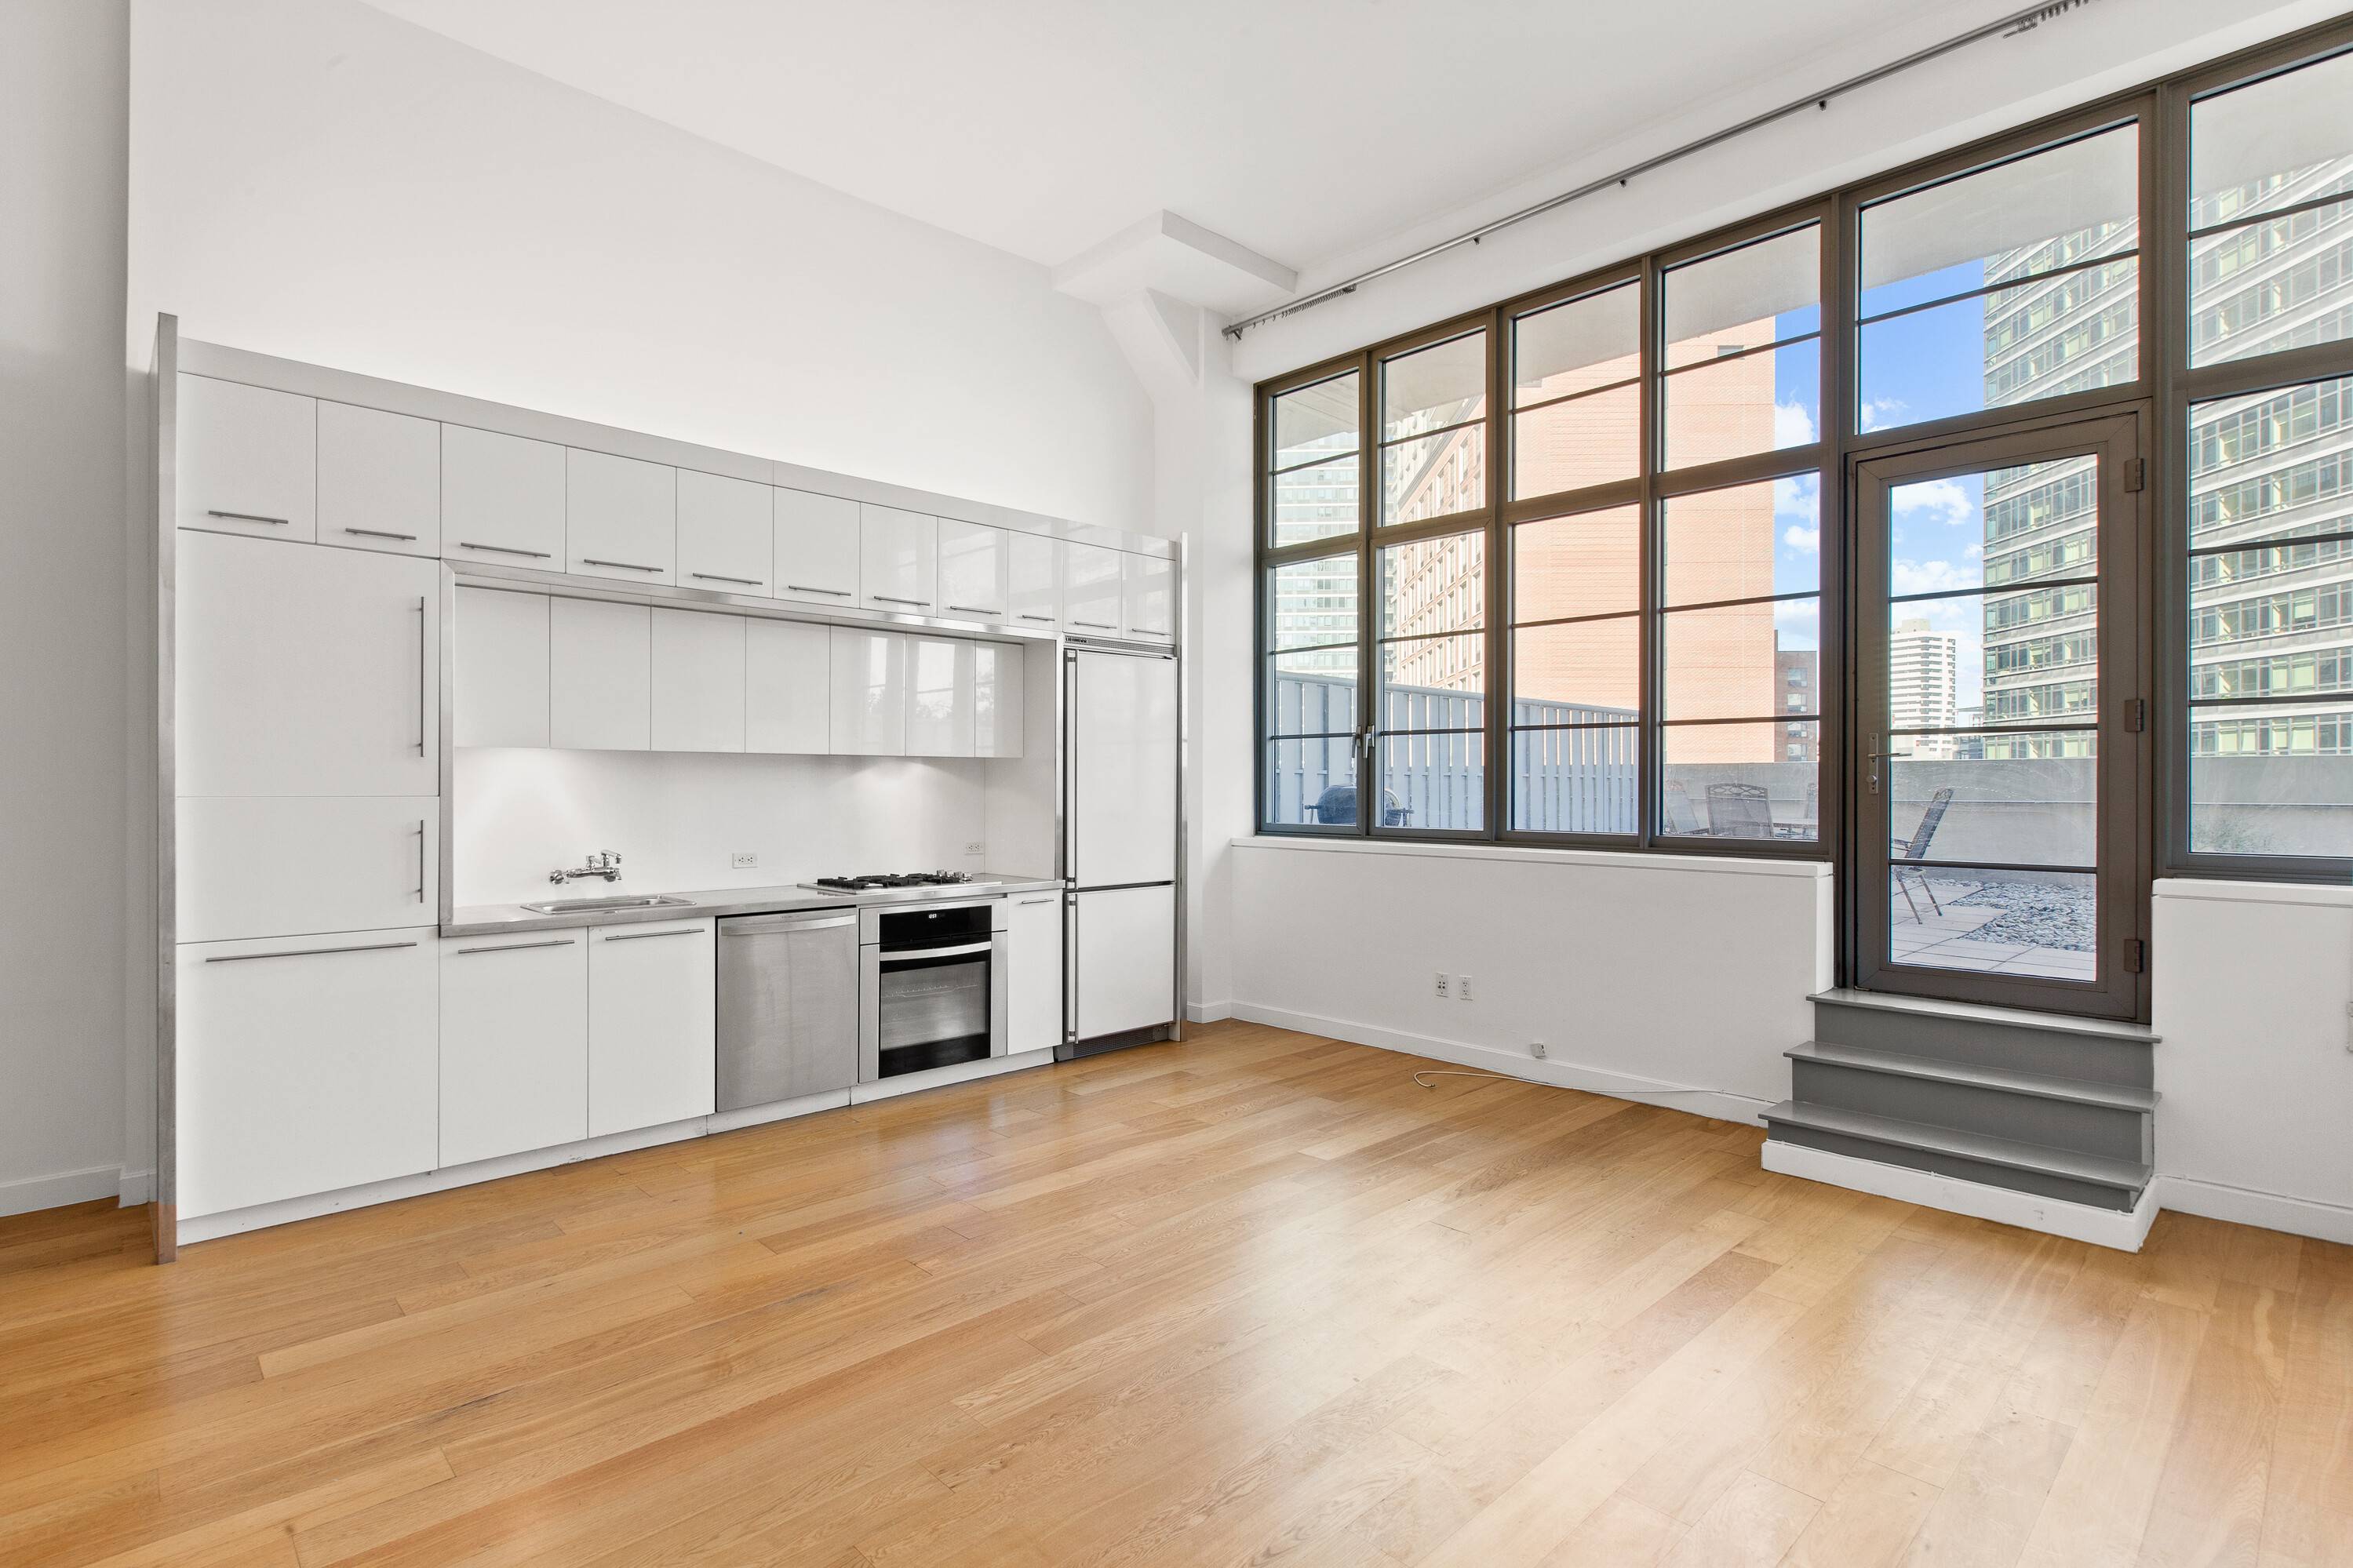 Arrist Lofts LIC - Spectacular Convertible 2Bedroom Loft with 725 SF Terrace